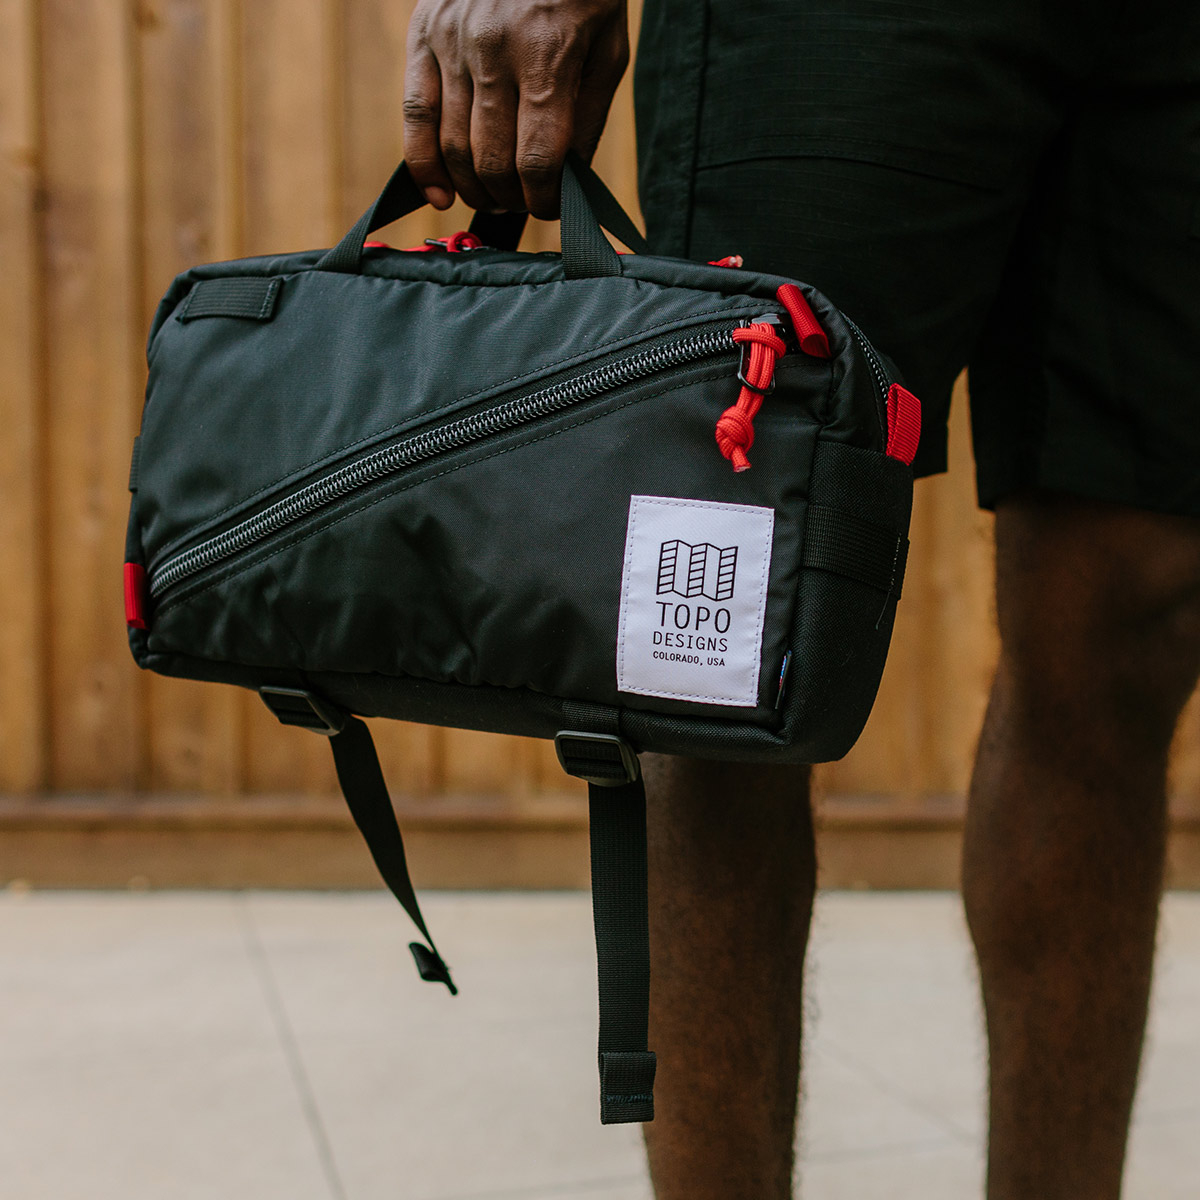 Topo Designs Quick Pack Black, a well-built, secure bag for travel